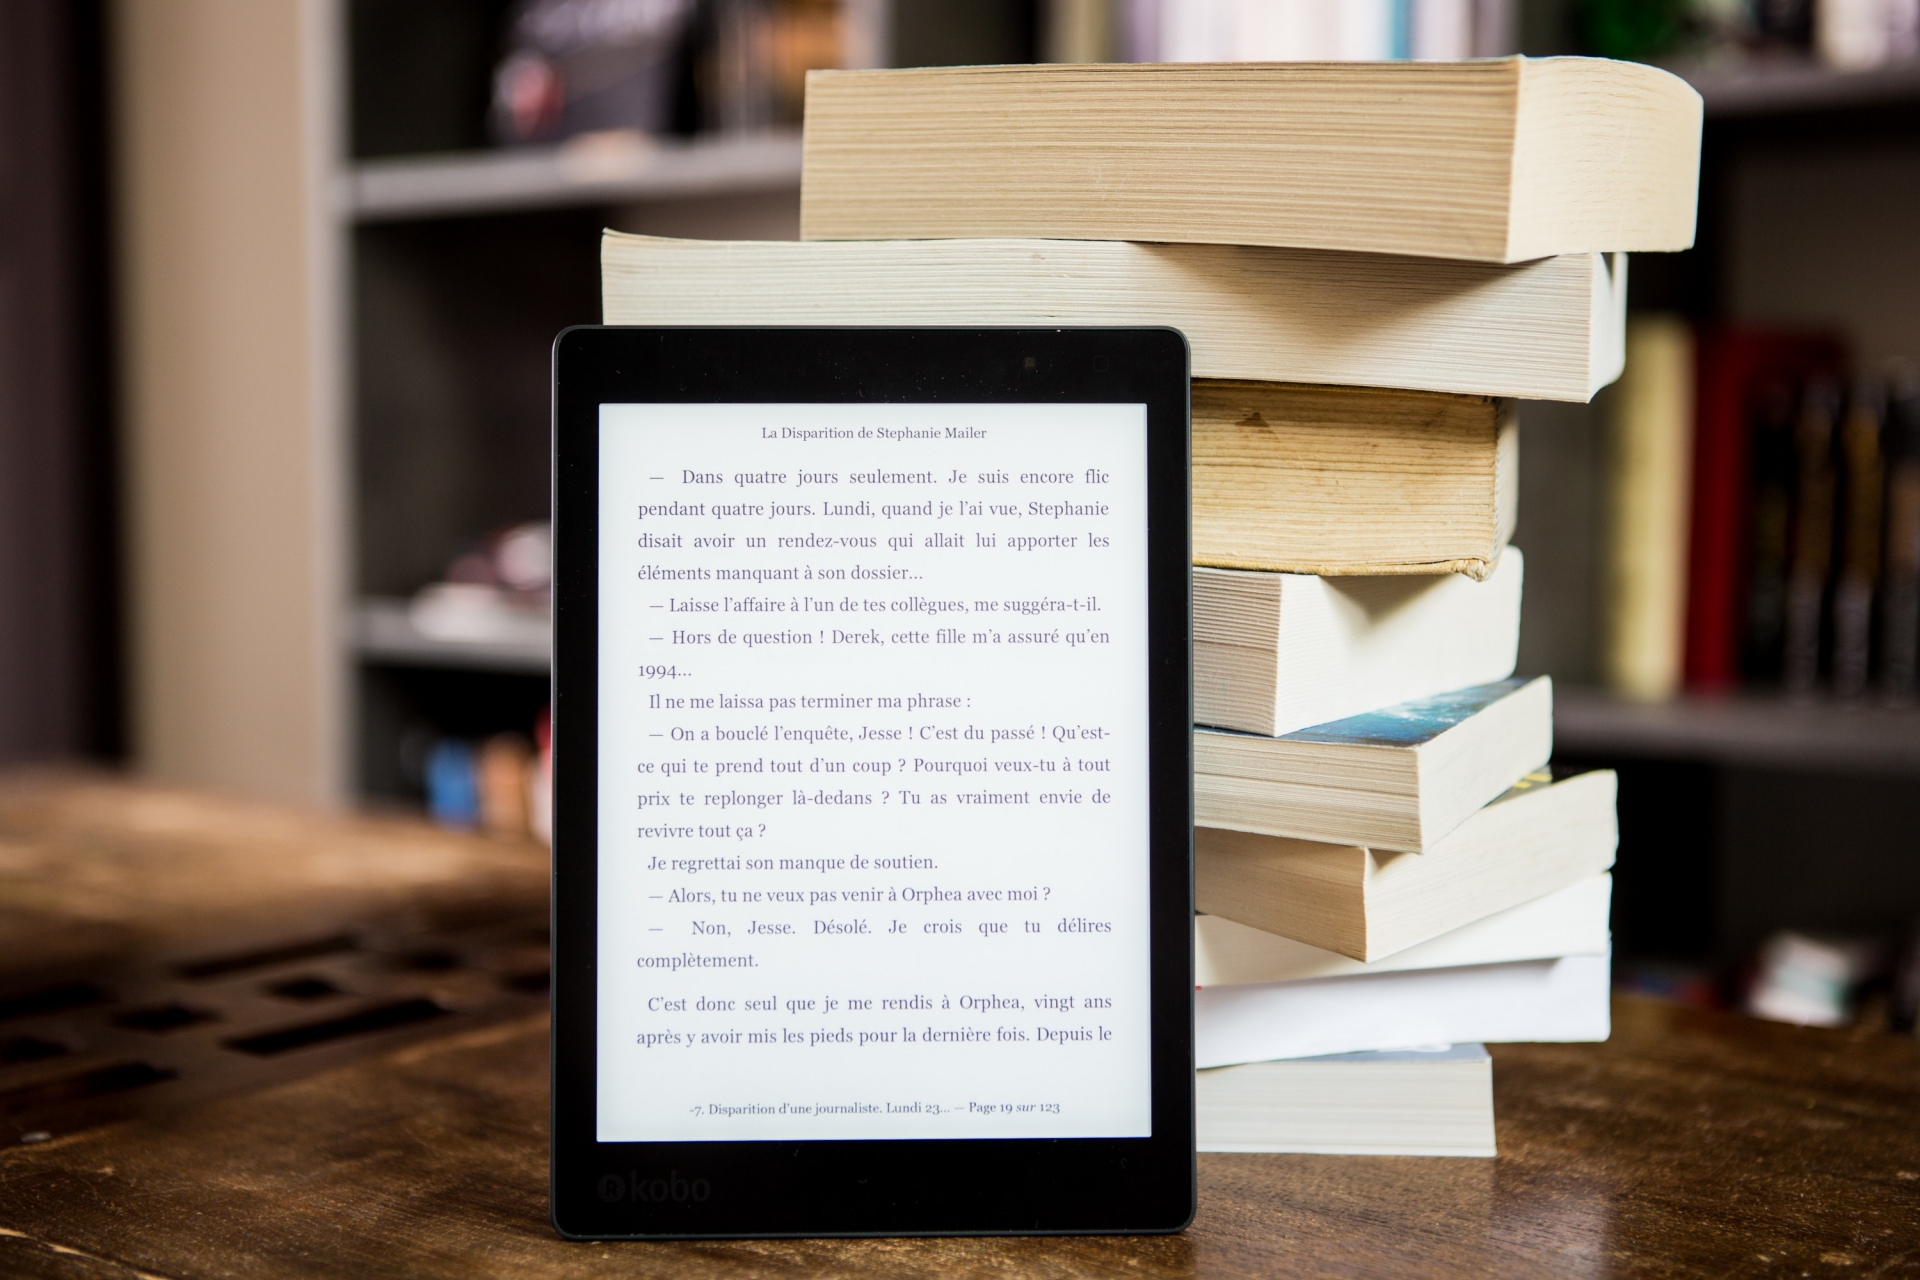 Sales of ebooks in 2021 drop to the lowest level in the last decade